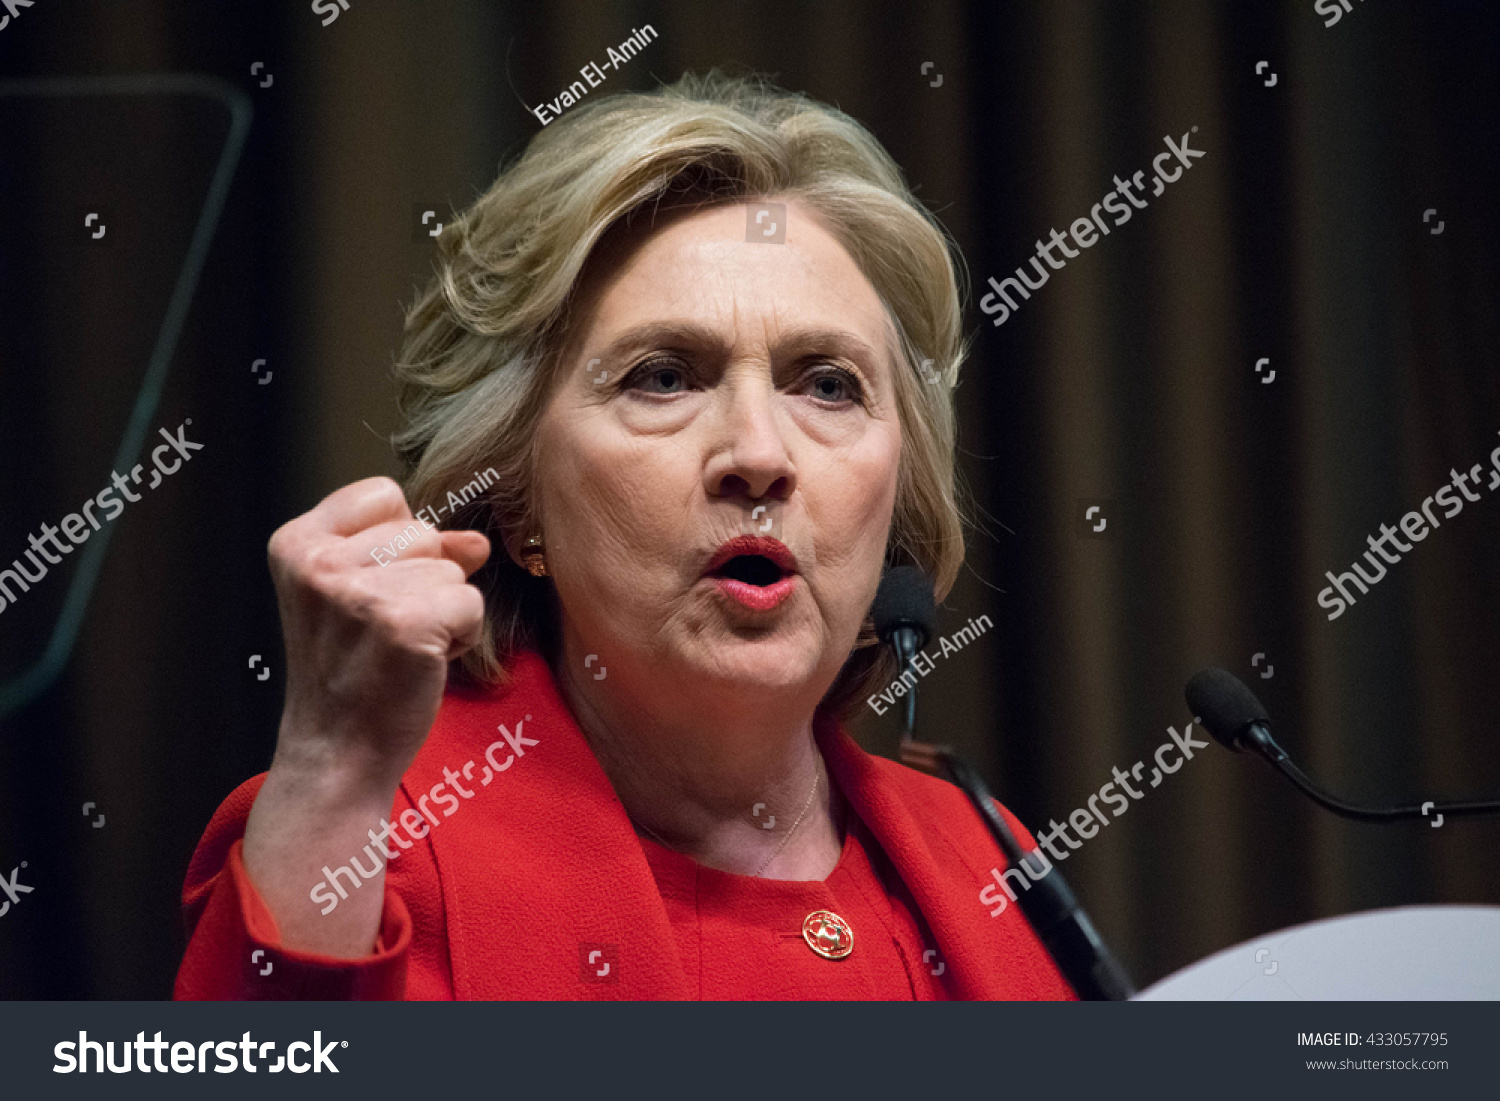 NEW YORK, USA - APRIL 13, 2016: Hillary Clinton makes an impactful gesture during a speech to the National Action Network 25th annual convention.